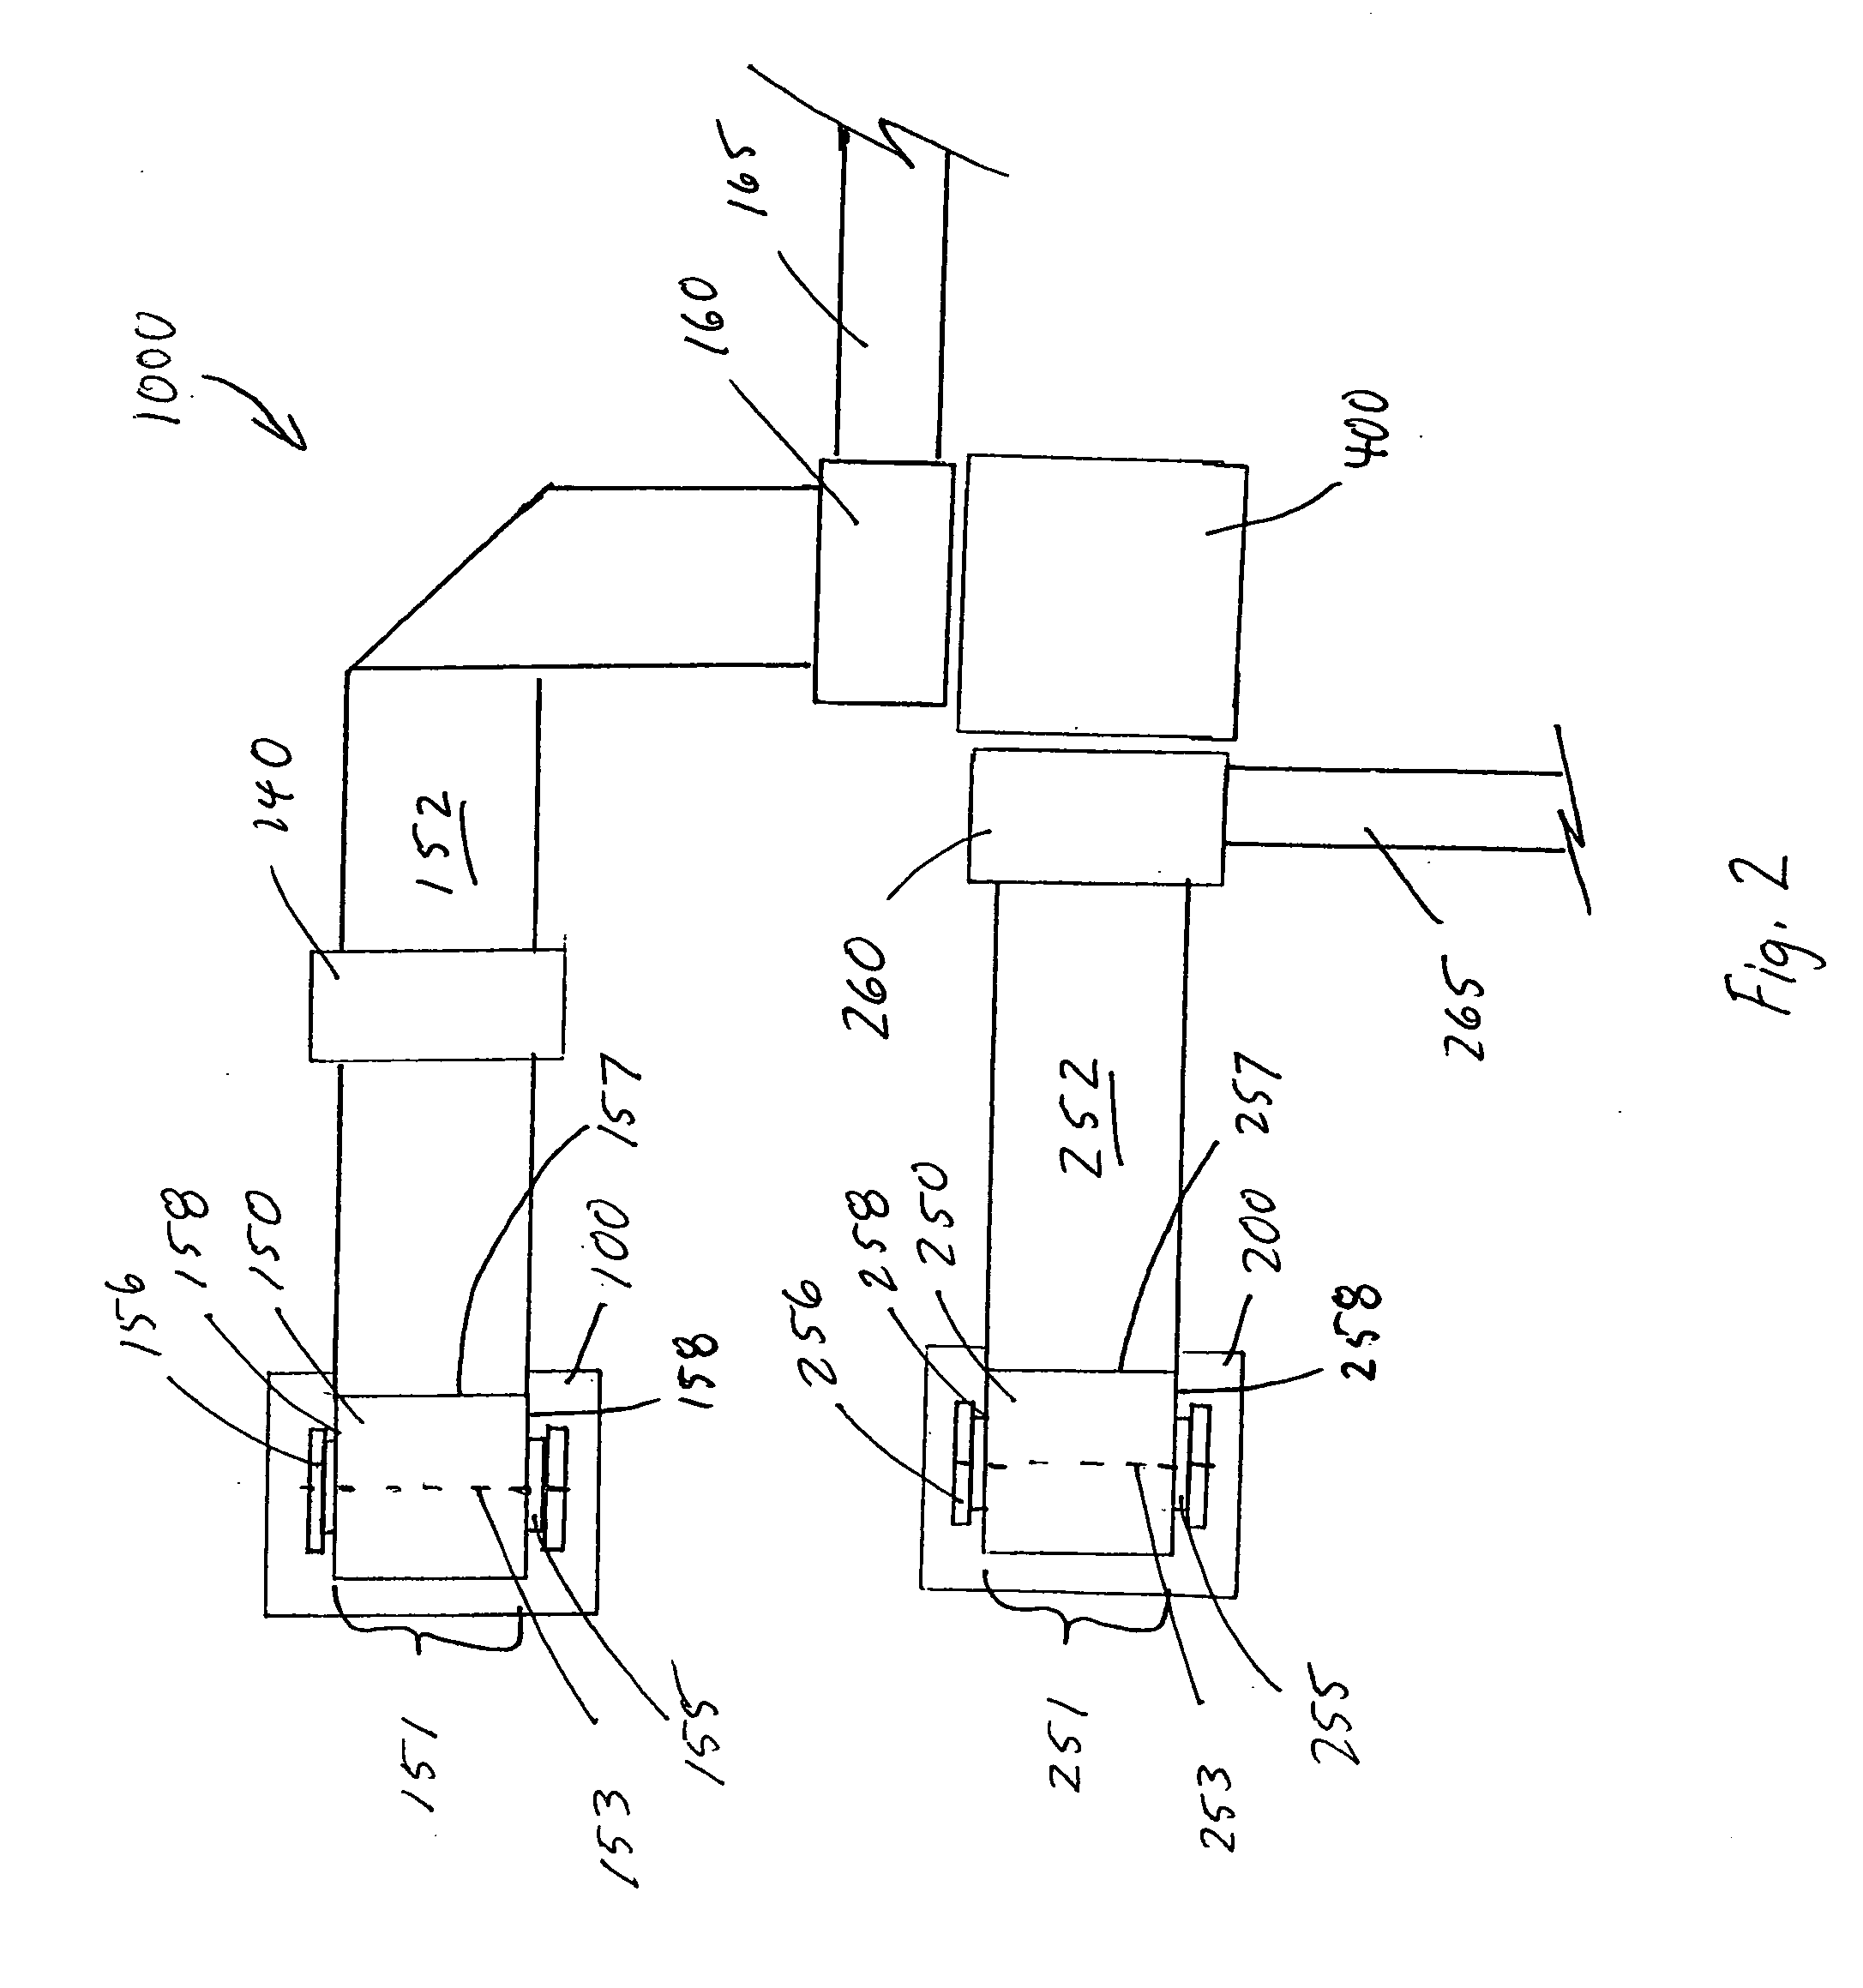 Apparatus and method for the concurrent converting of multiple web materials